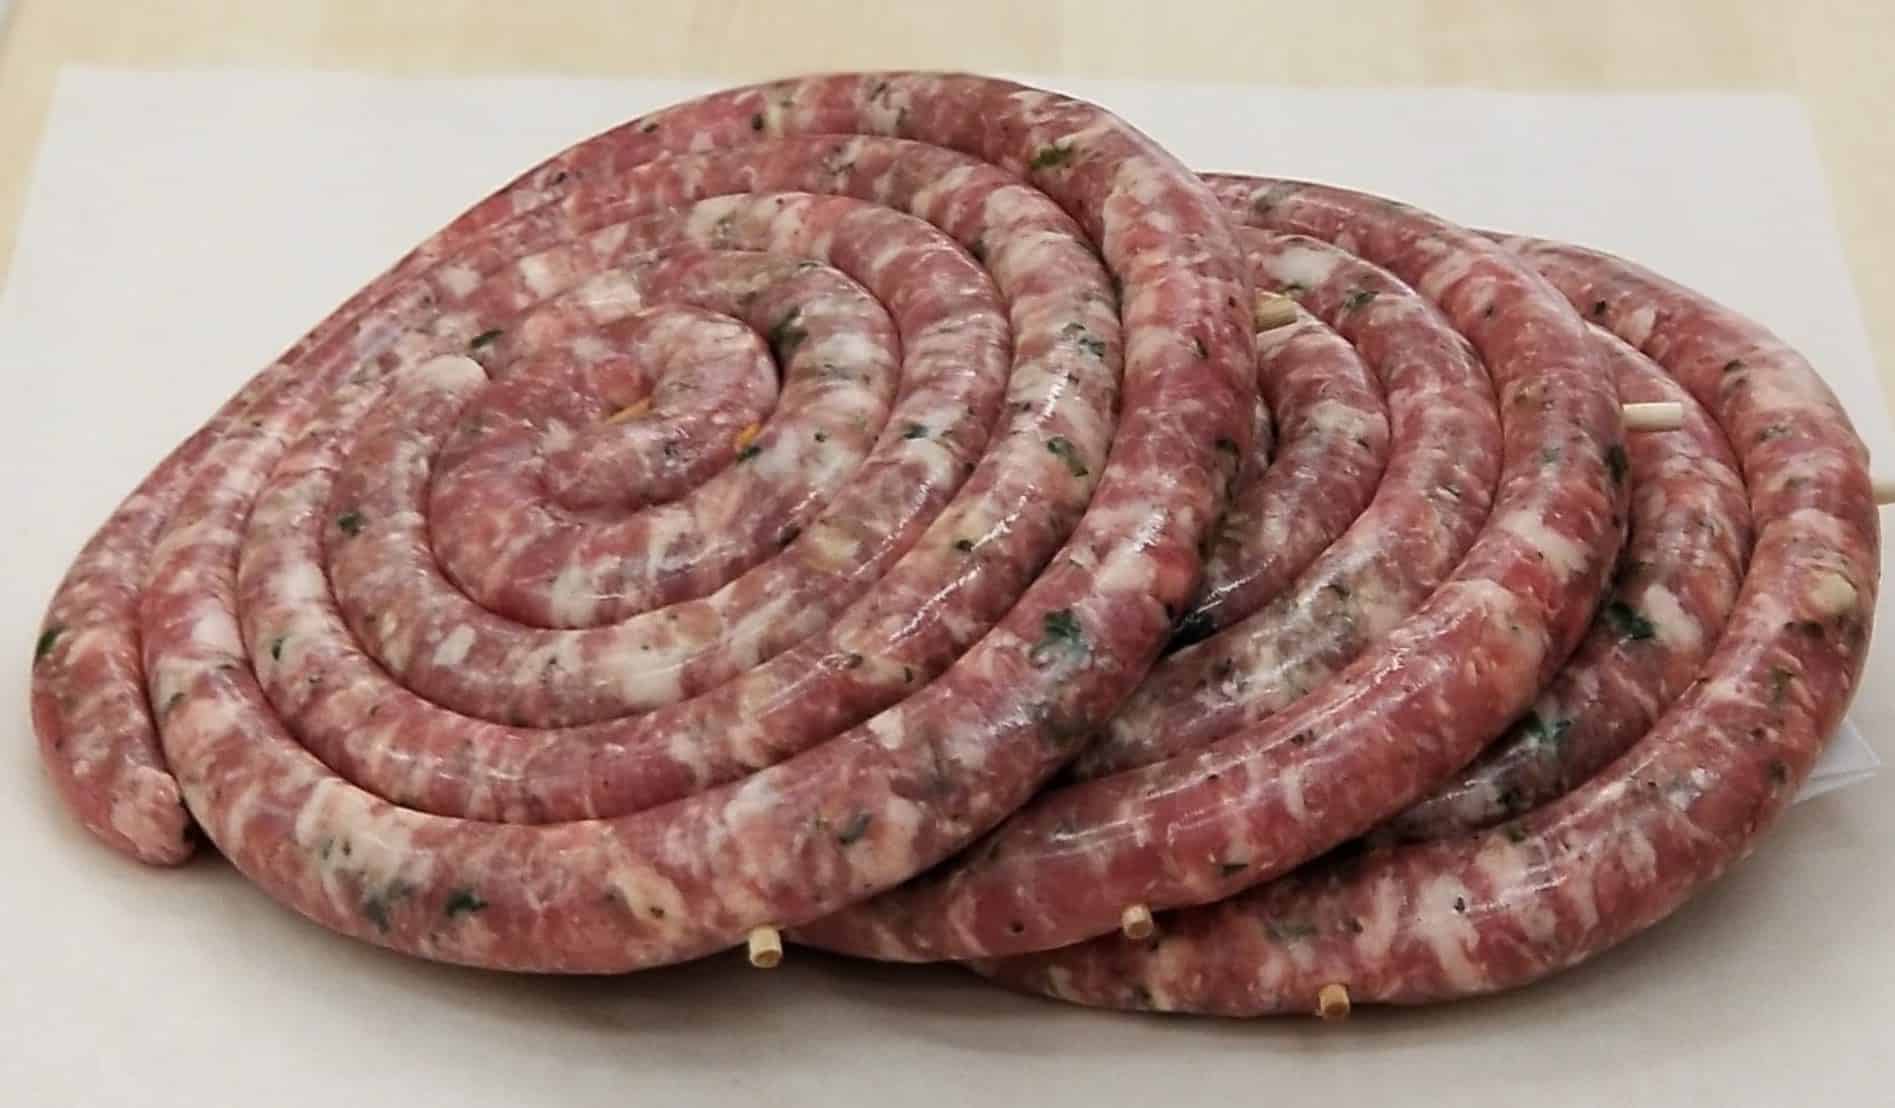 Vincent's Cheese And Parsley Sausage - 1lb - 1 1/4lb